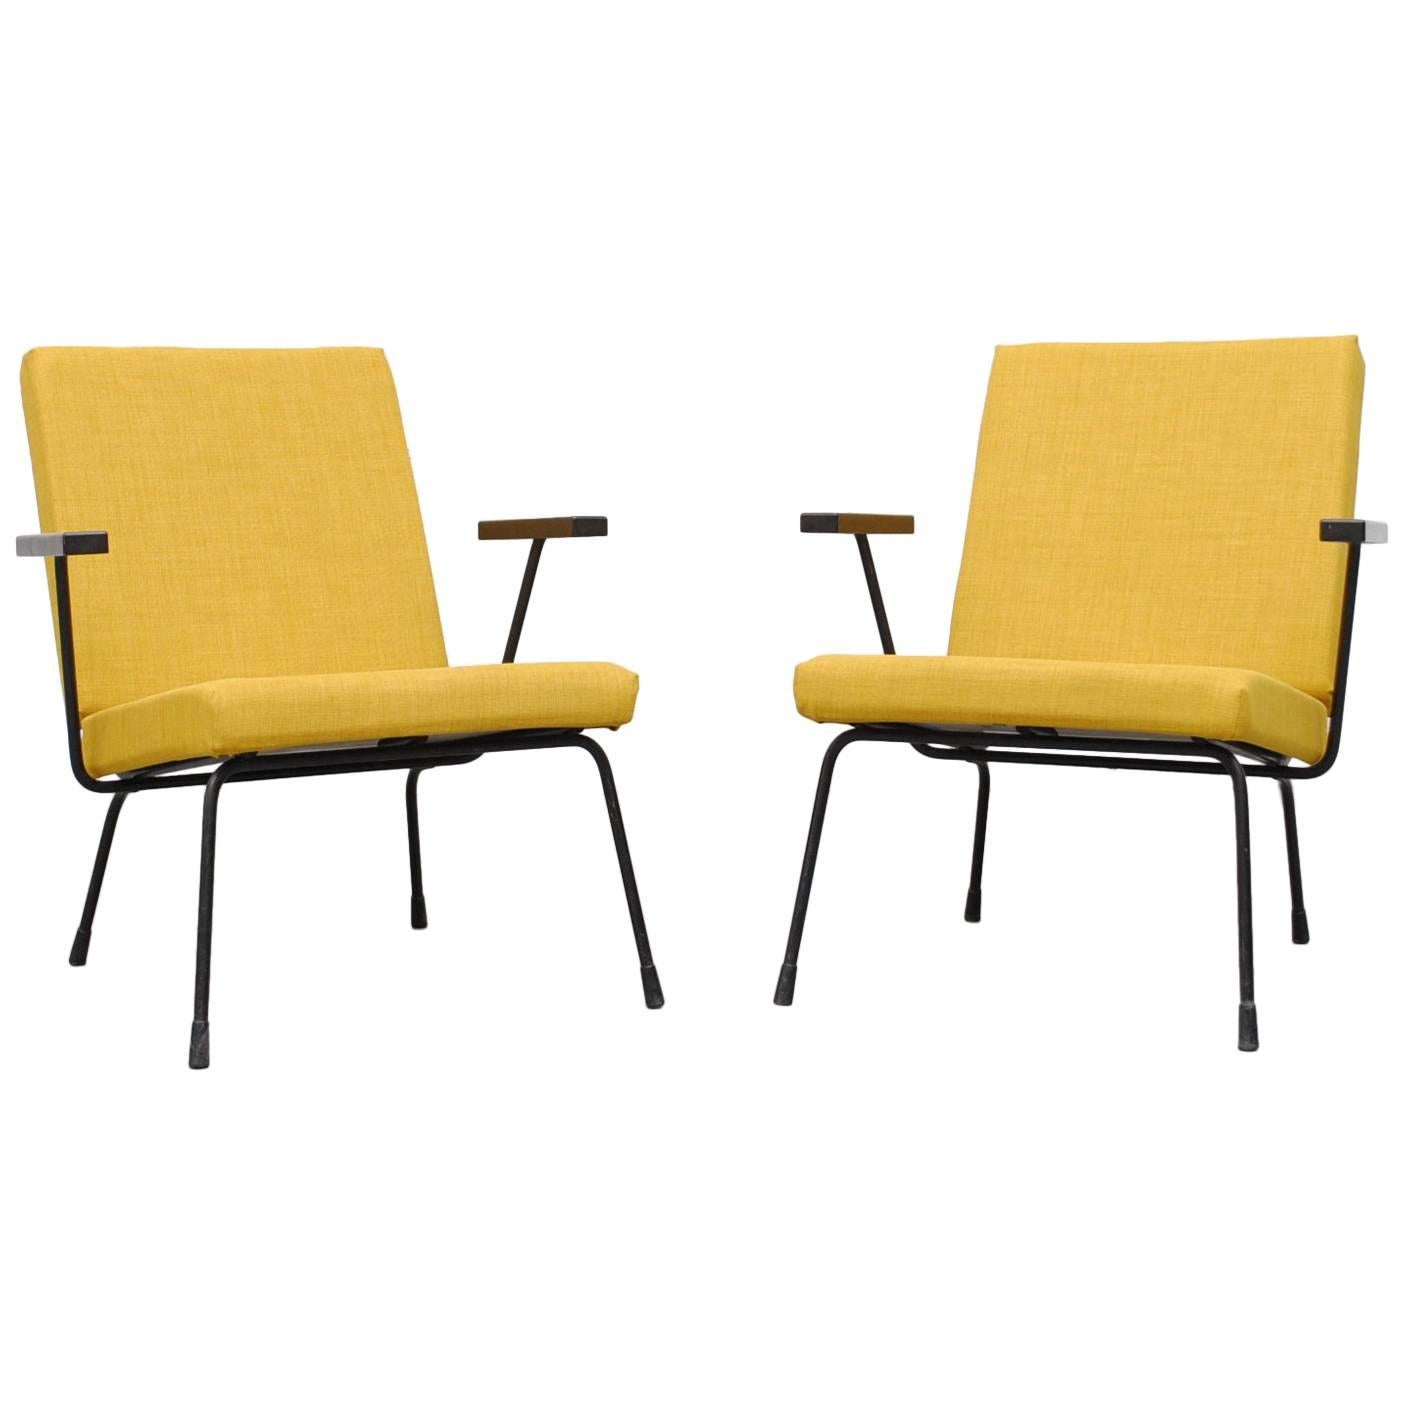 Pair of Wim Rietveld Chair No. 1407 Lounge Chairs for Gispen